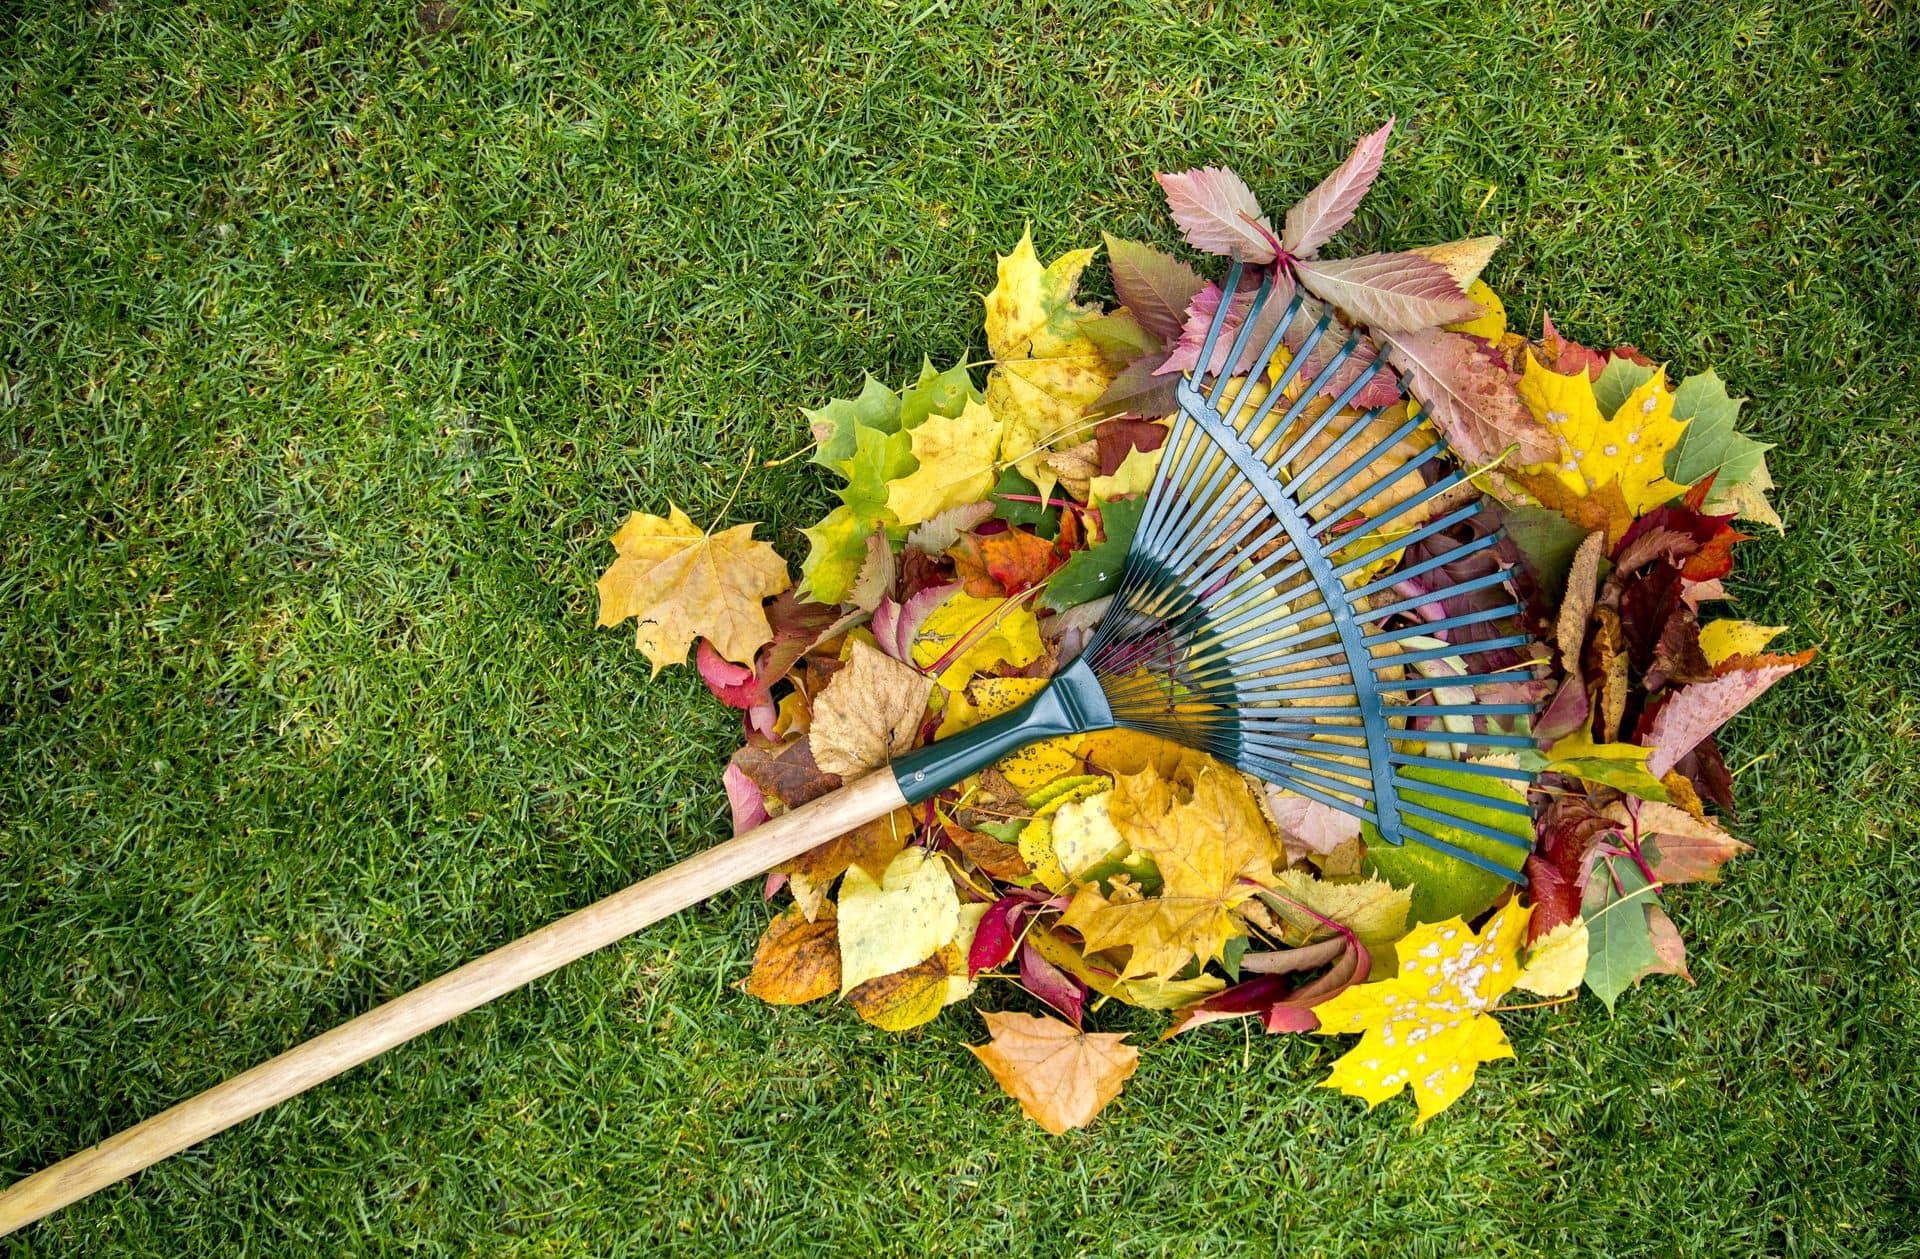 How to rake leaves, and is it really necessary?